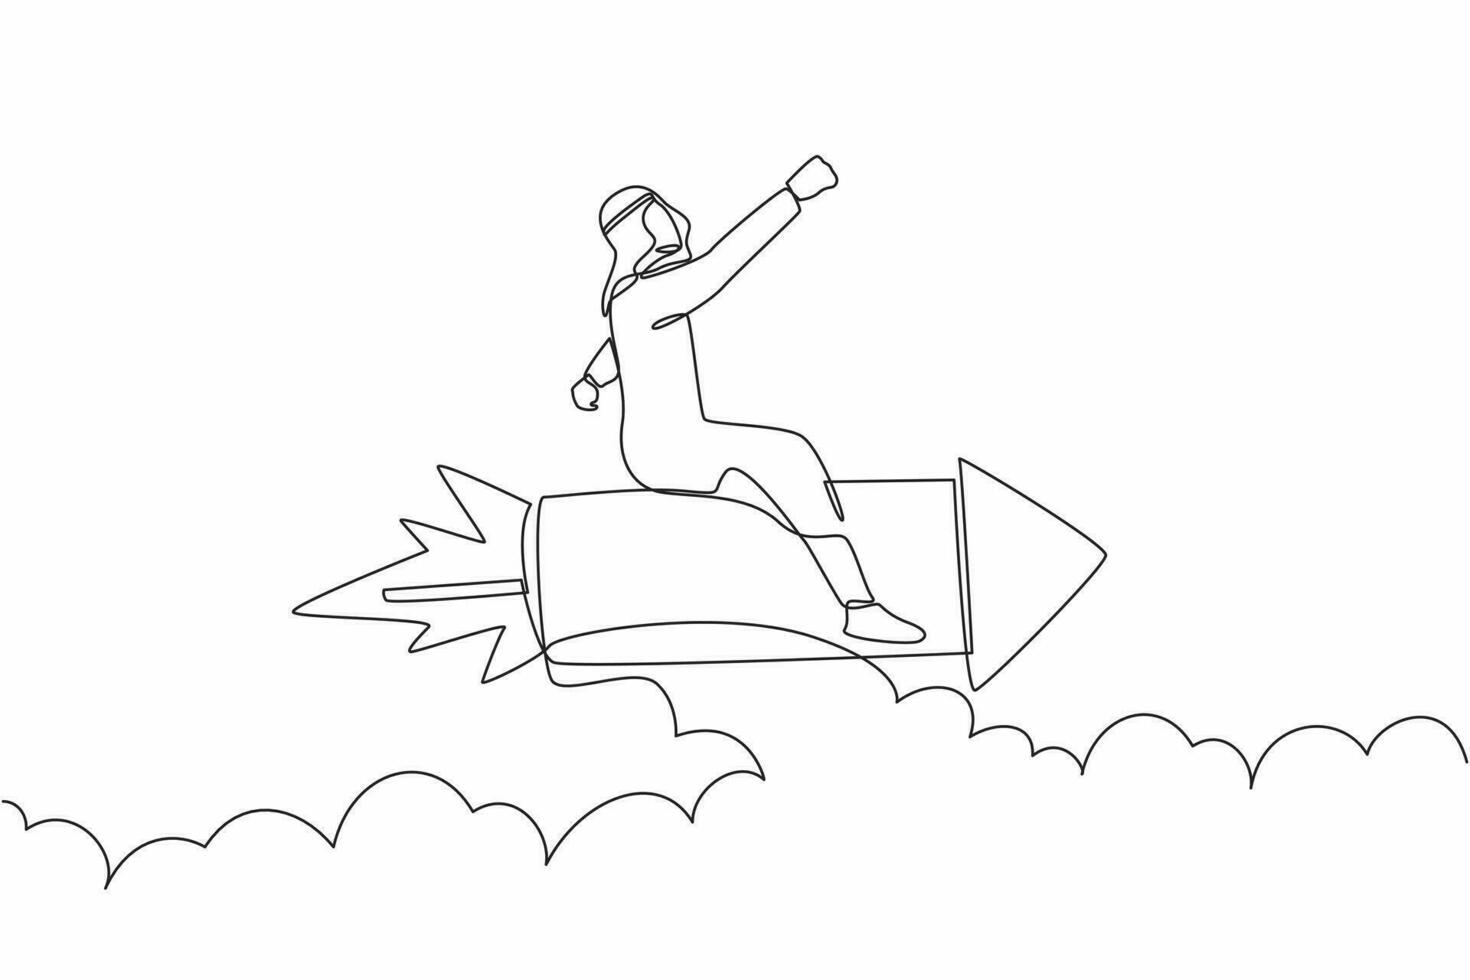 Continuous one line drawing Arab businessman flying high riding firework rocket. Ready to launching new startup business digital. Minimal metaphor. Single line draw design vector graphic illustration